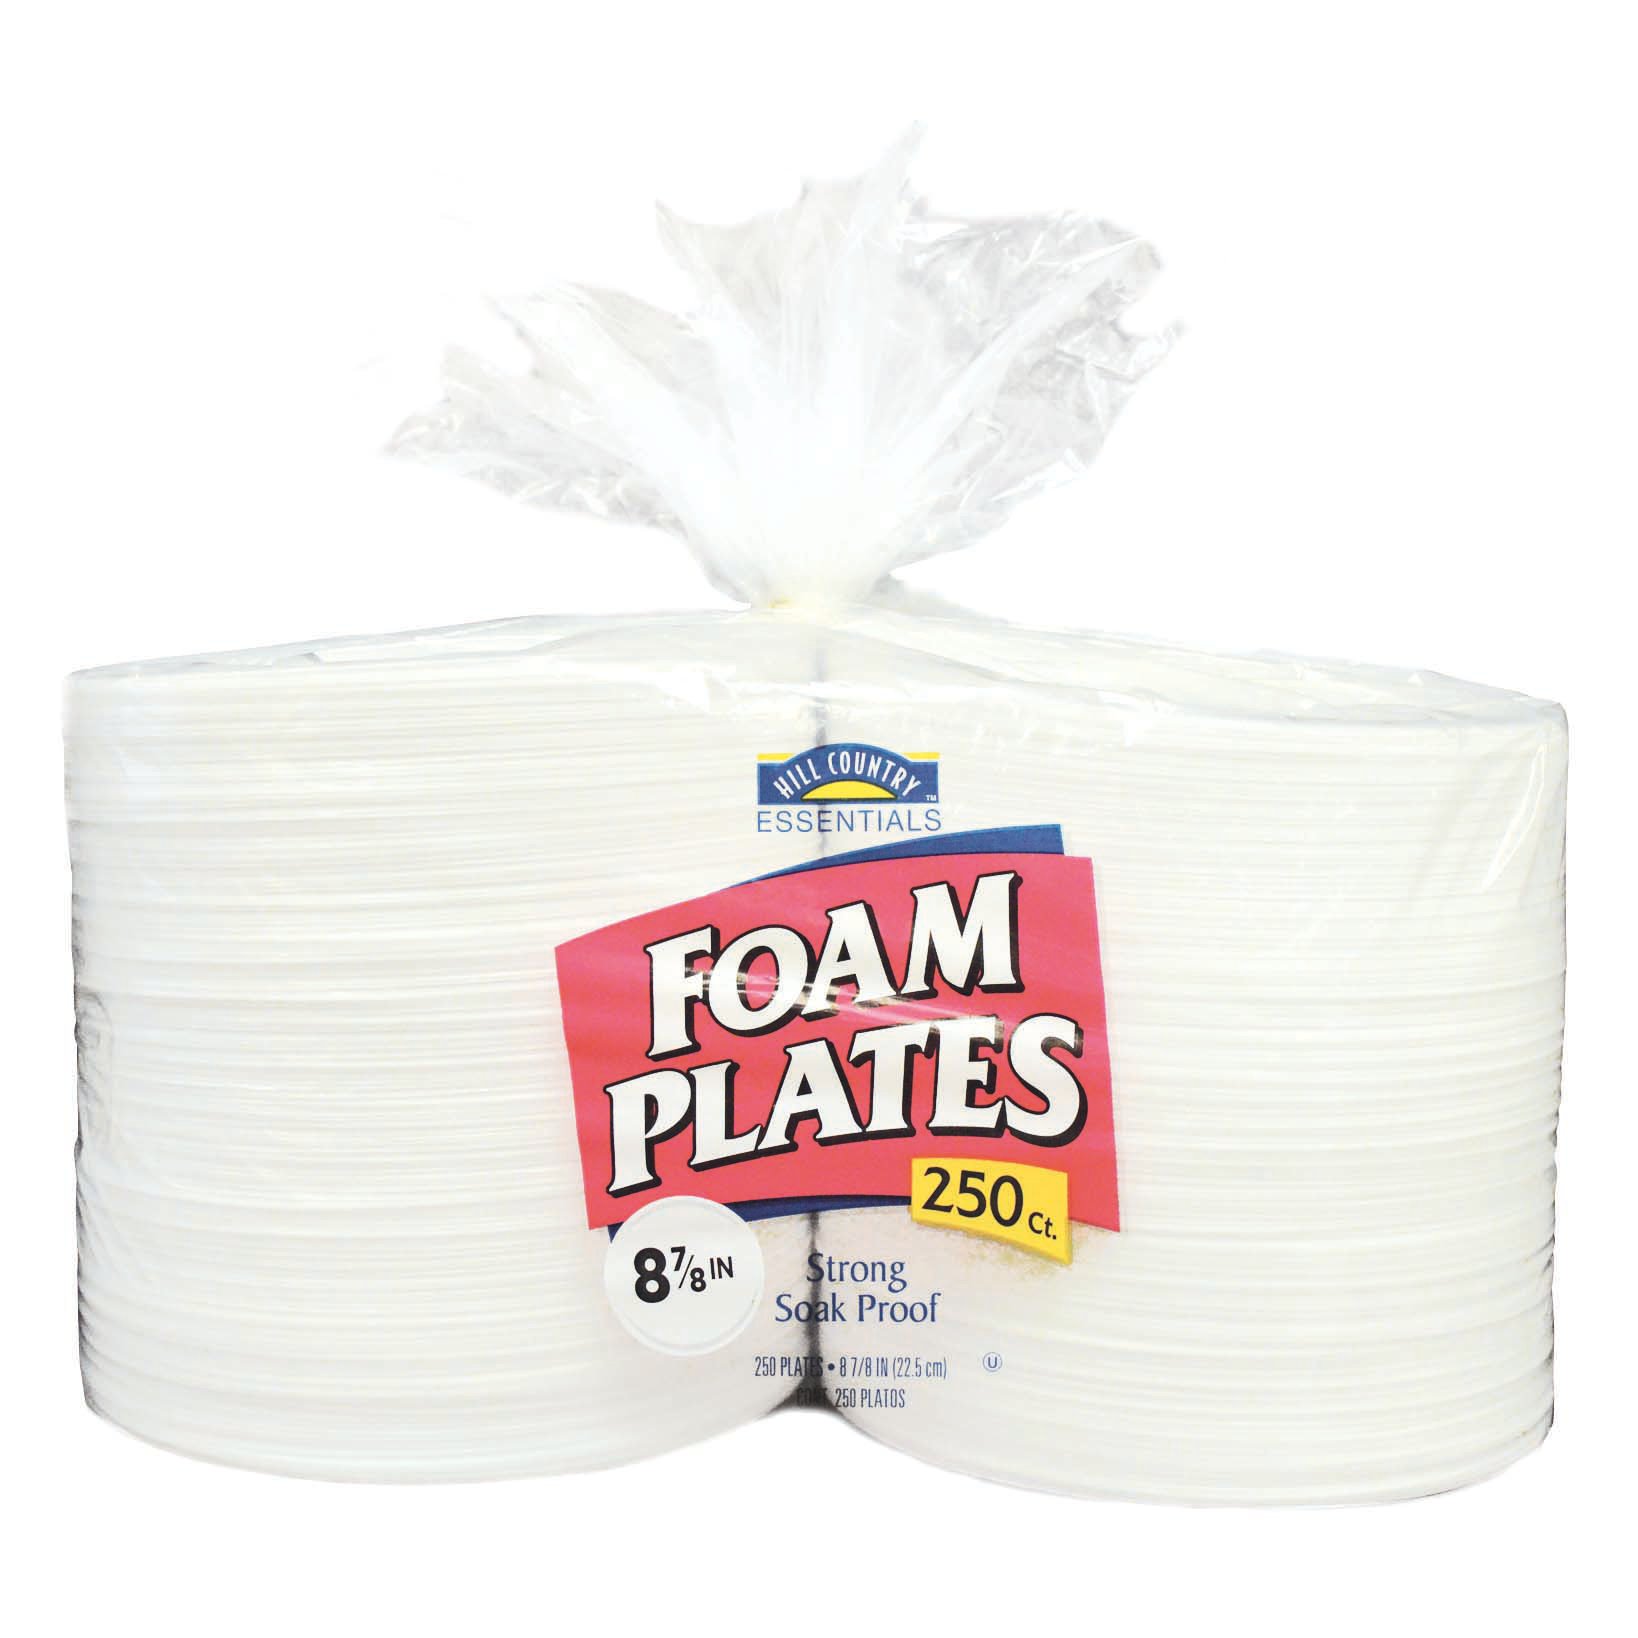 Hill Country Essentials 8.8 in Foam Plates